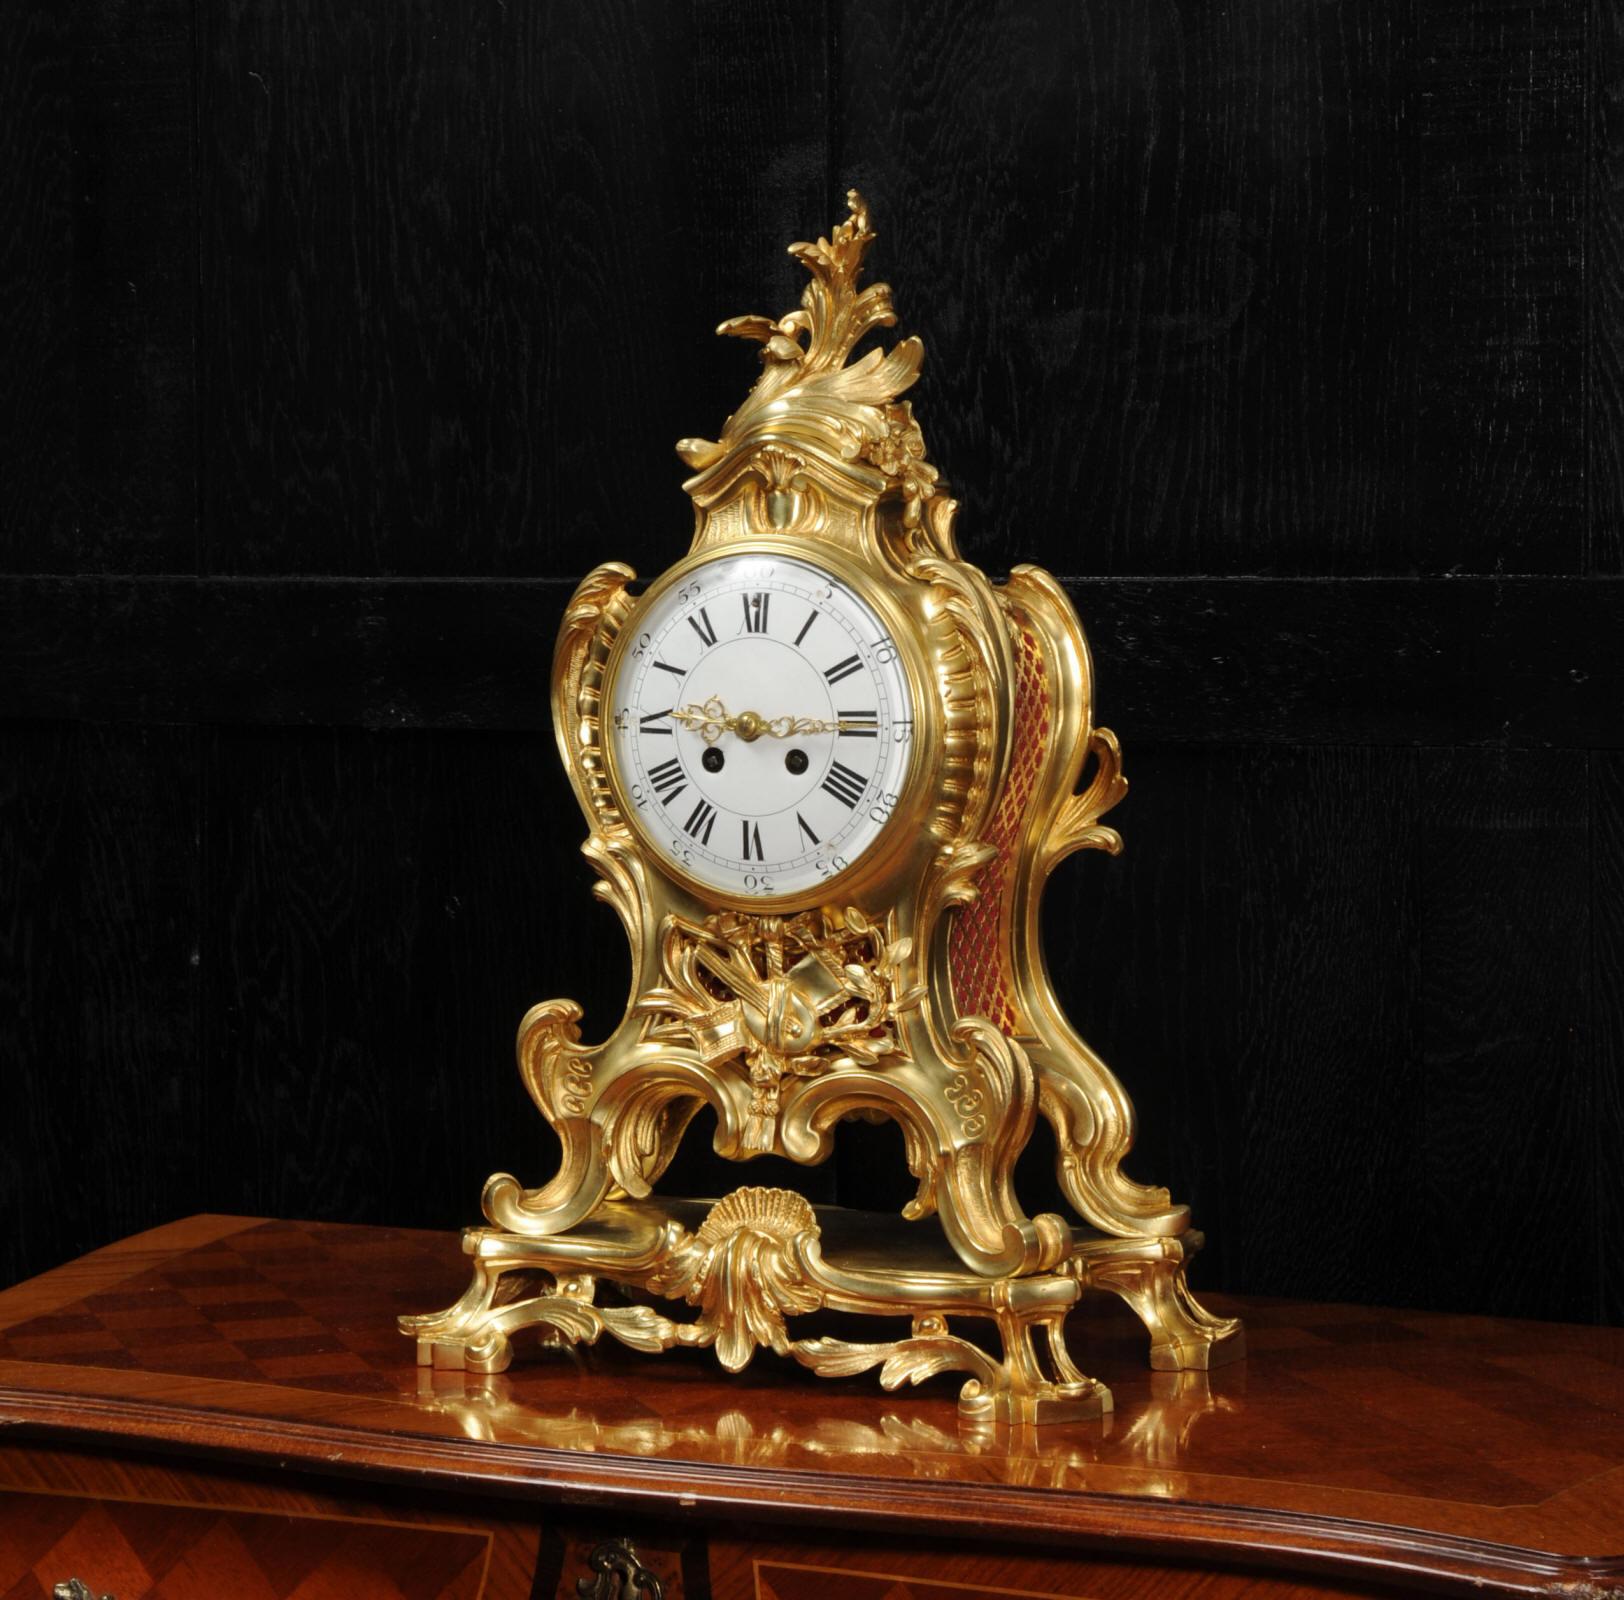 A superb and substantial gilt bronze clock. It is of the highest quality, beautifully modelled and finished in ormolu (finely gilded bronze or doré bronze). It is of balloon shape, formed with bold scrolls, curves and acanthus. Below the dial is a